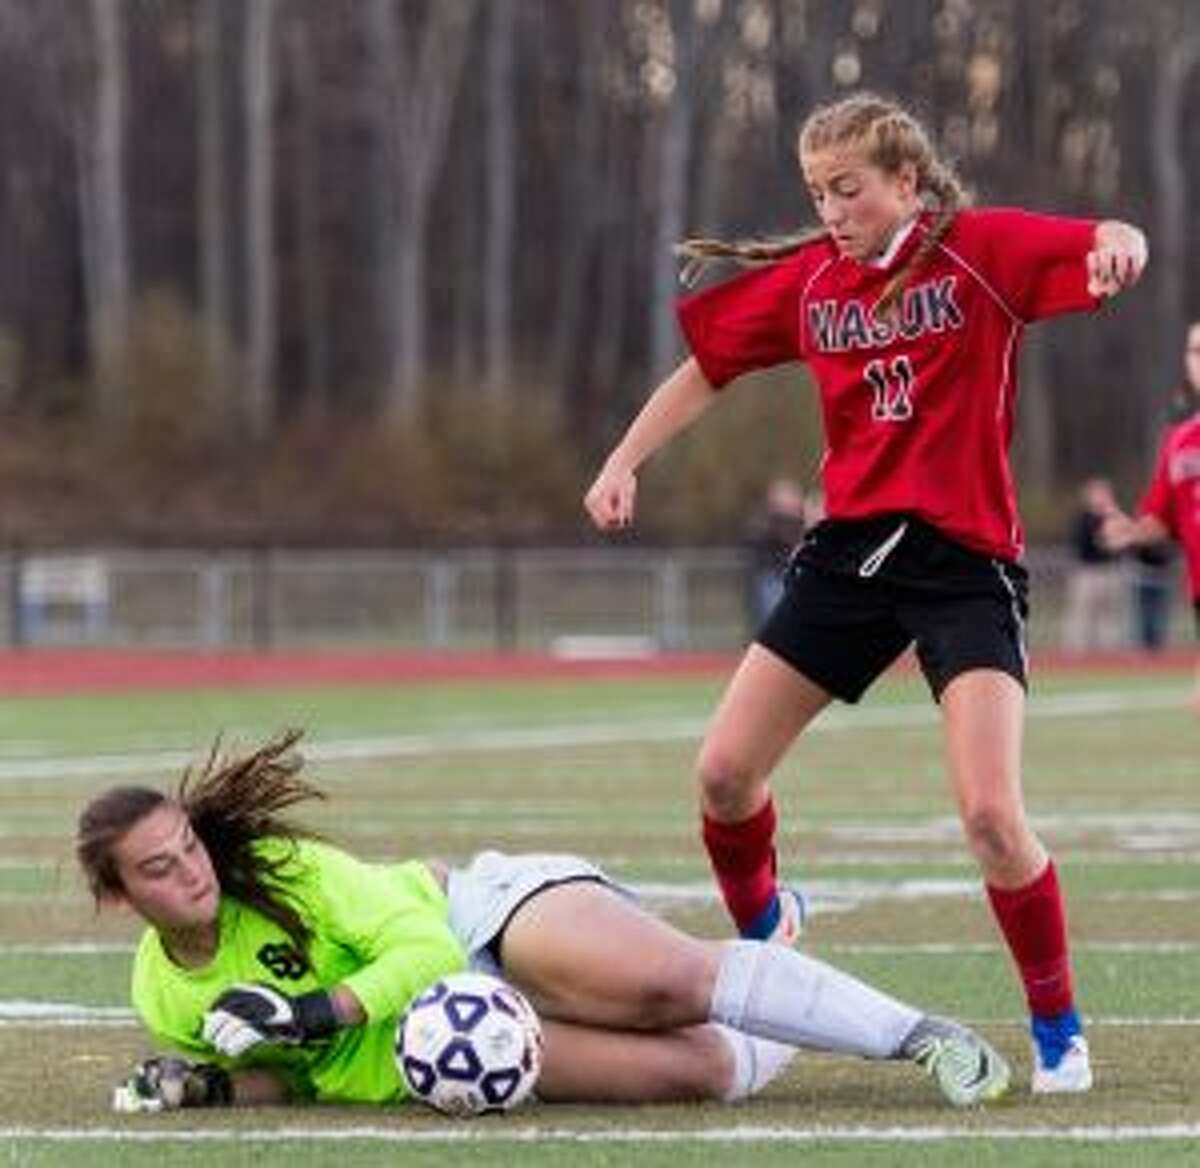 Cadet keeper Veronica O’Rourke makes a sprawling save, as the Panthers’ Giavanna DeLorenzo looks for a rebound.